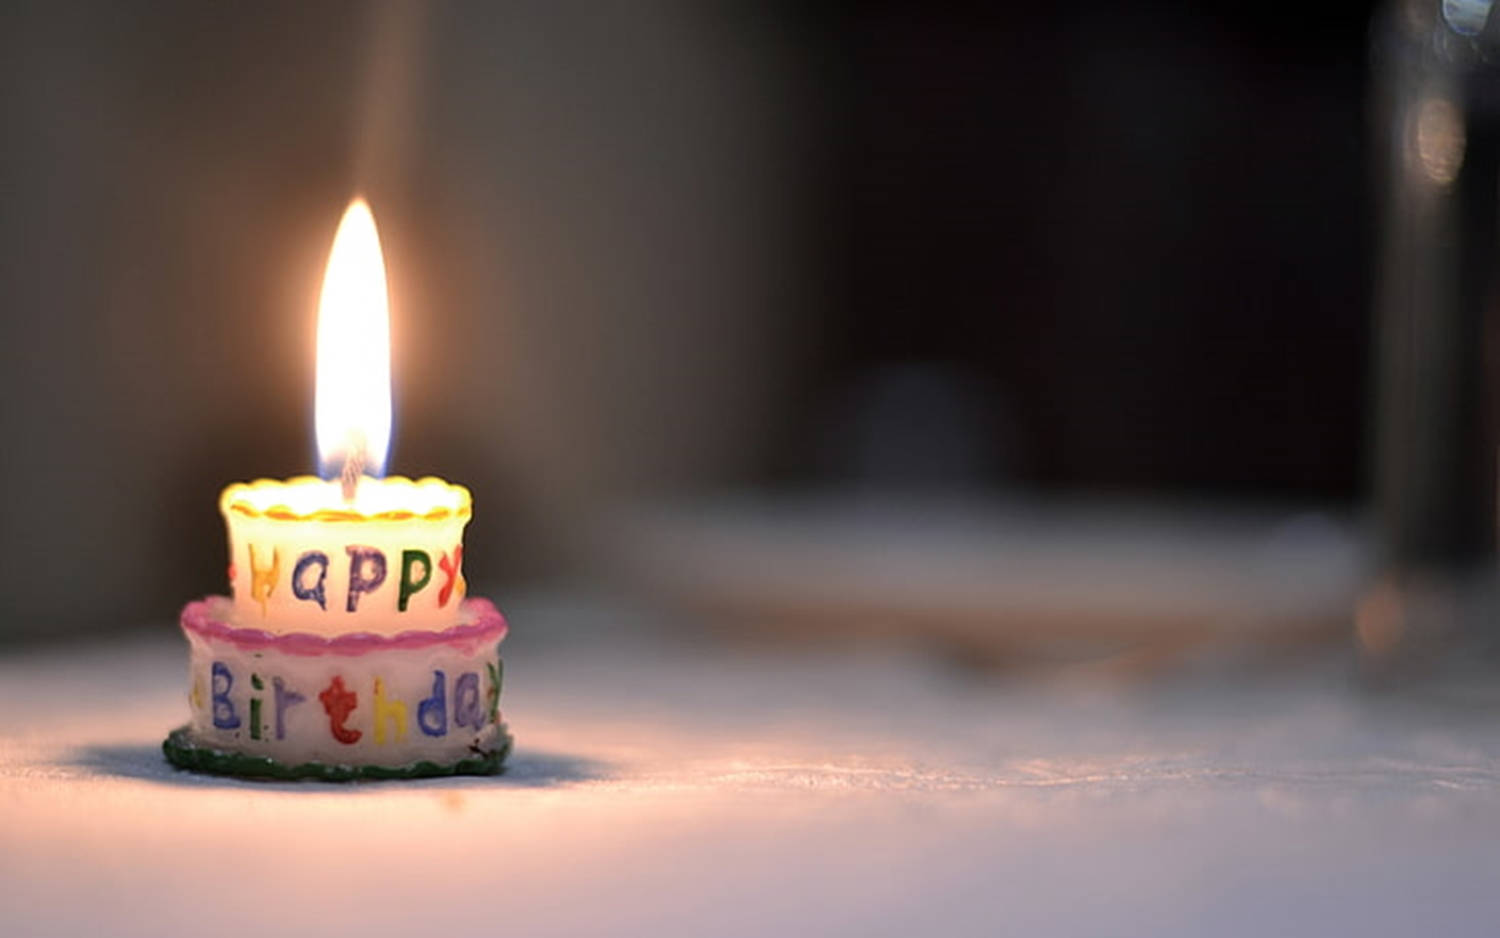 A vibrant celebration - Birthday cake with lit candles Wallpaper